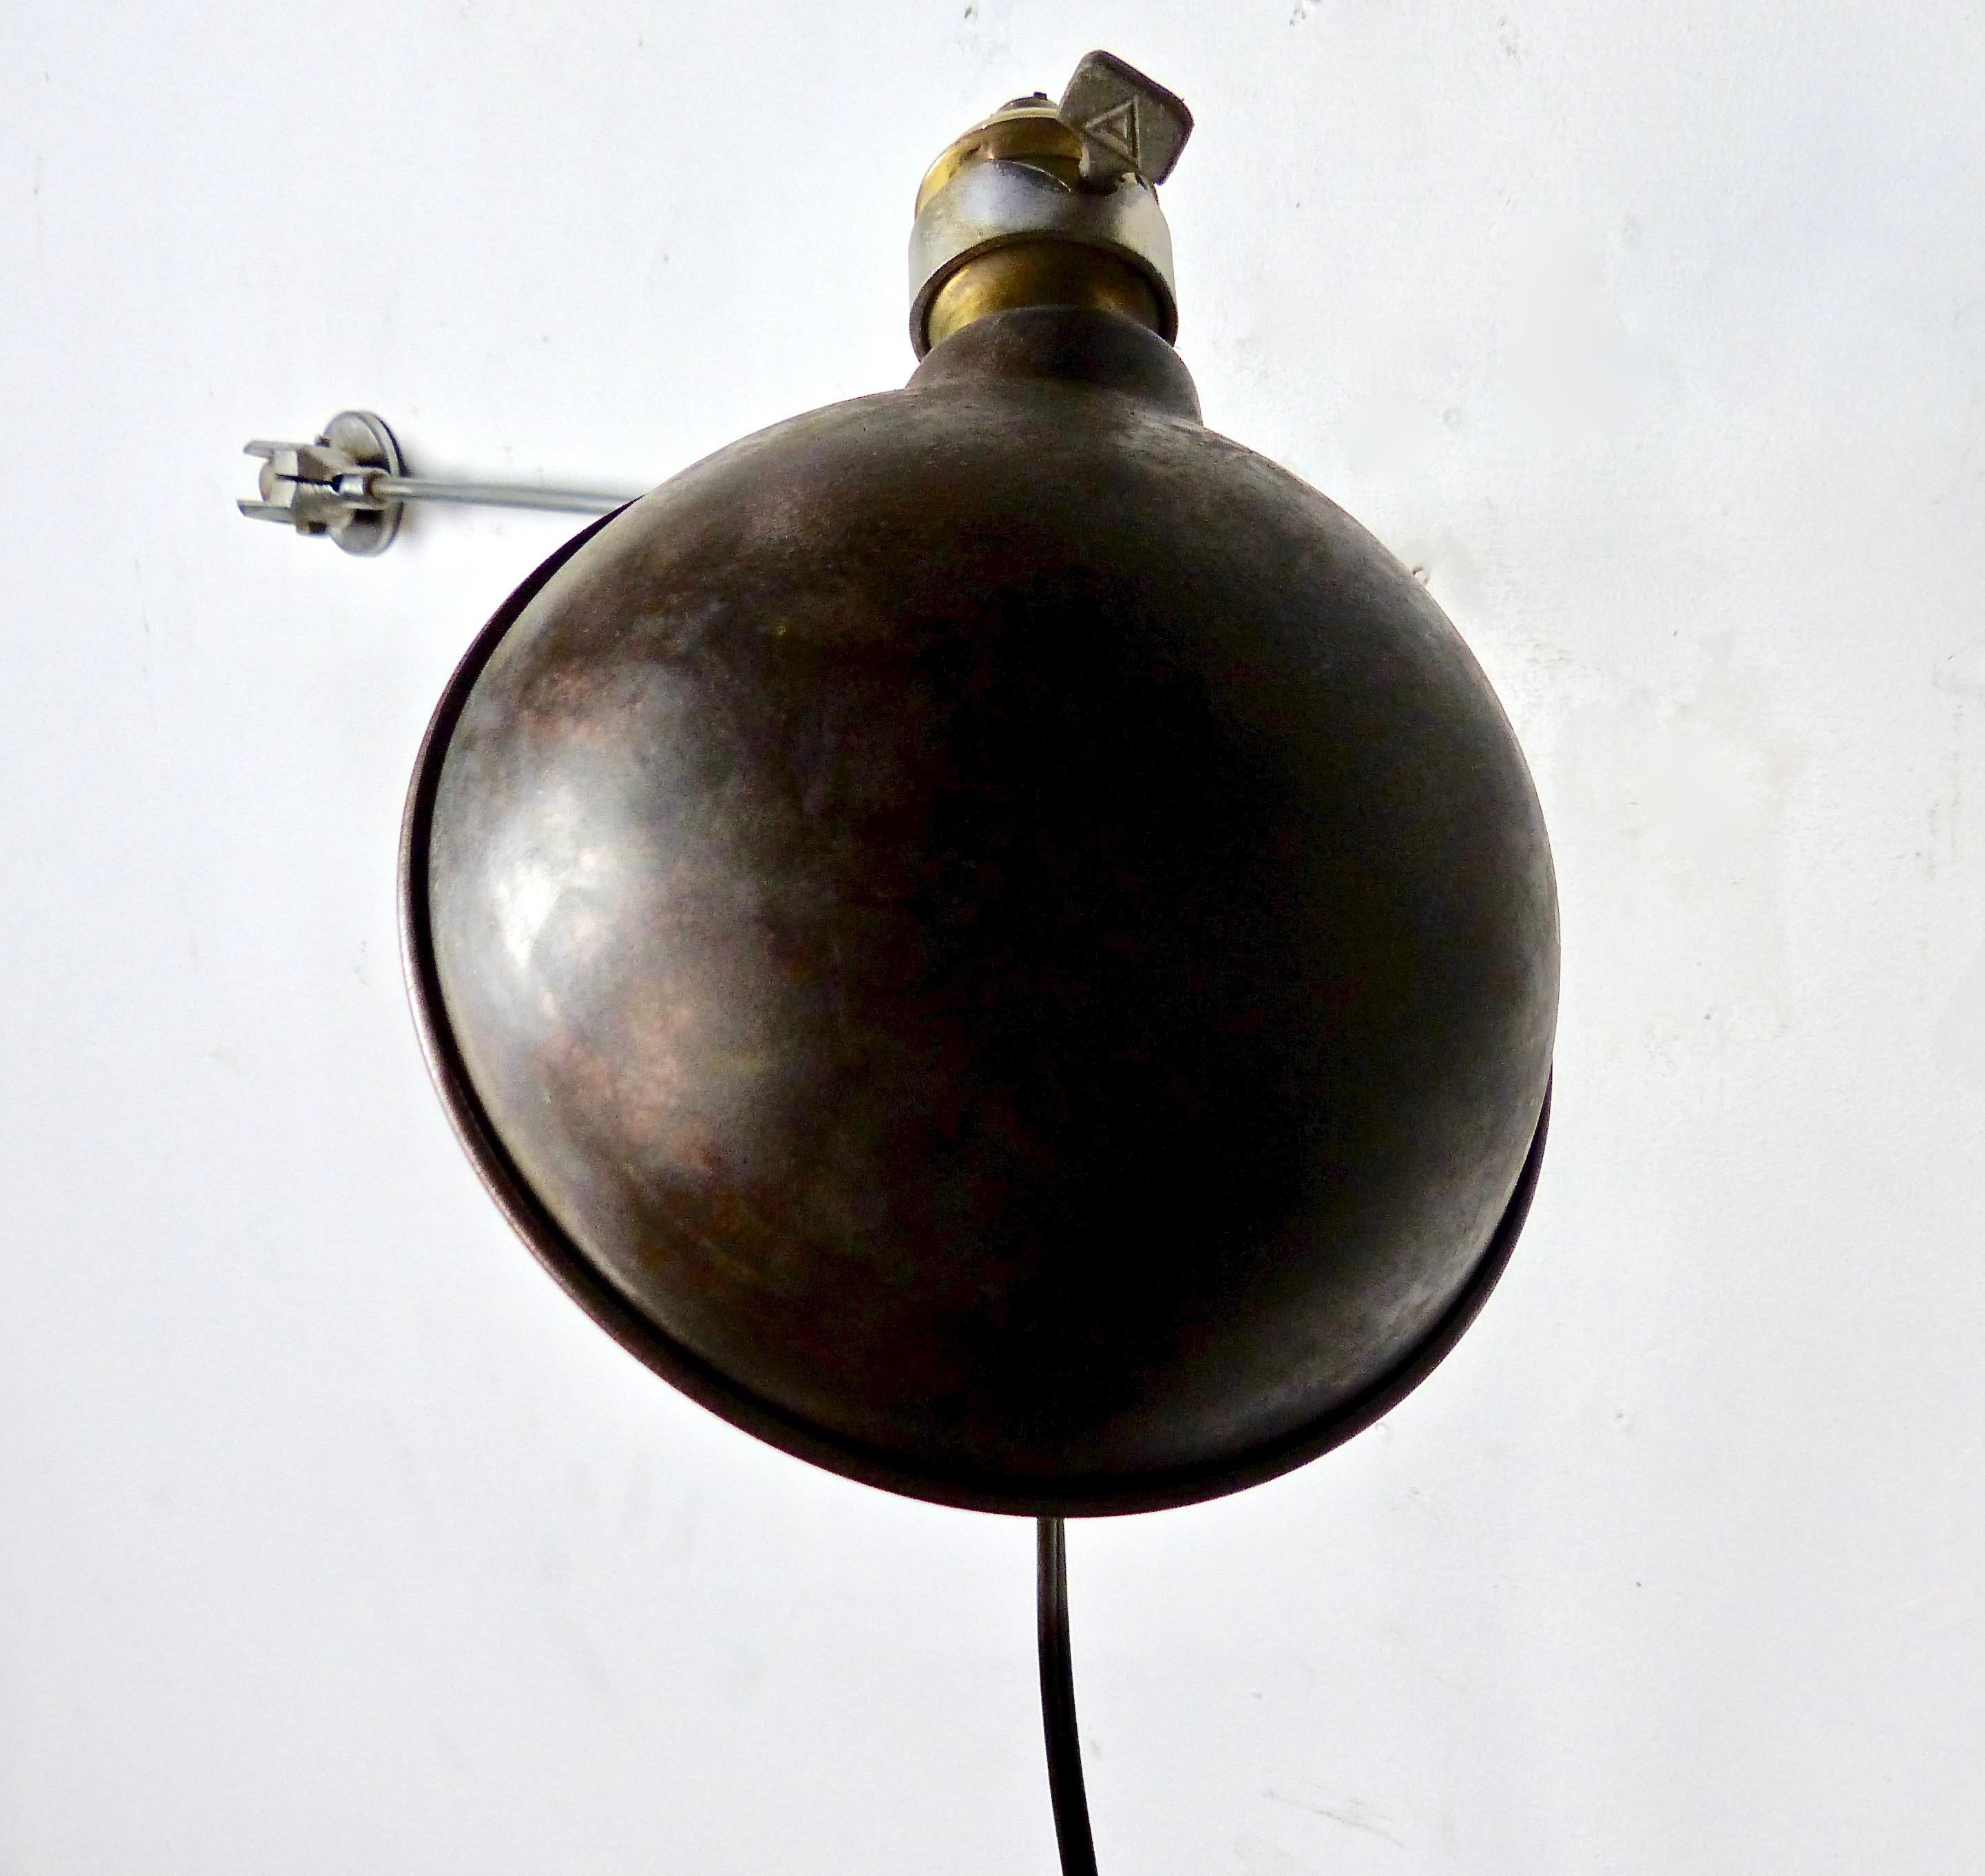 A circa 1920 articulating wall sconce with a copper shade and interesting steel hardware. Re-wired and CSA approved to current electrical standards.
Dimensions 24” width (fully extended) x 6” diameter.